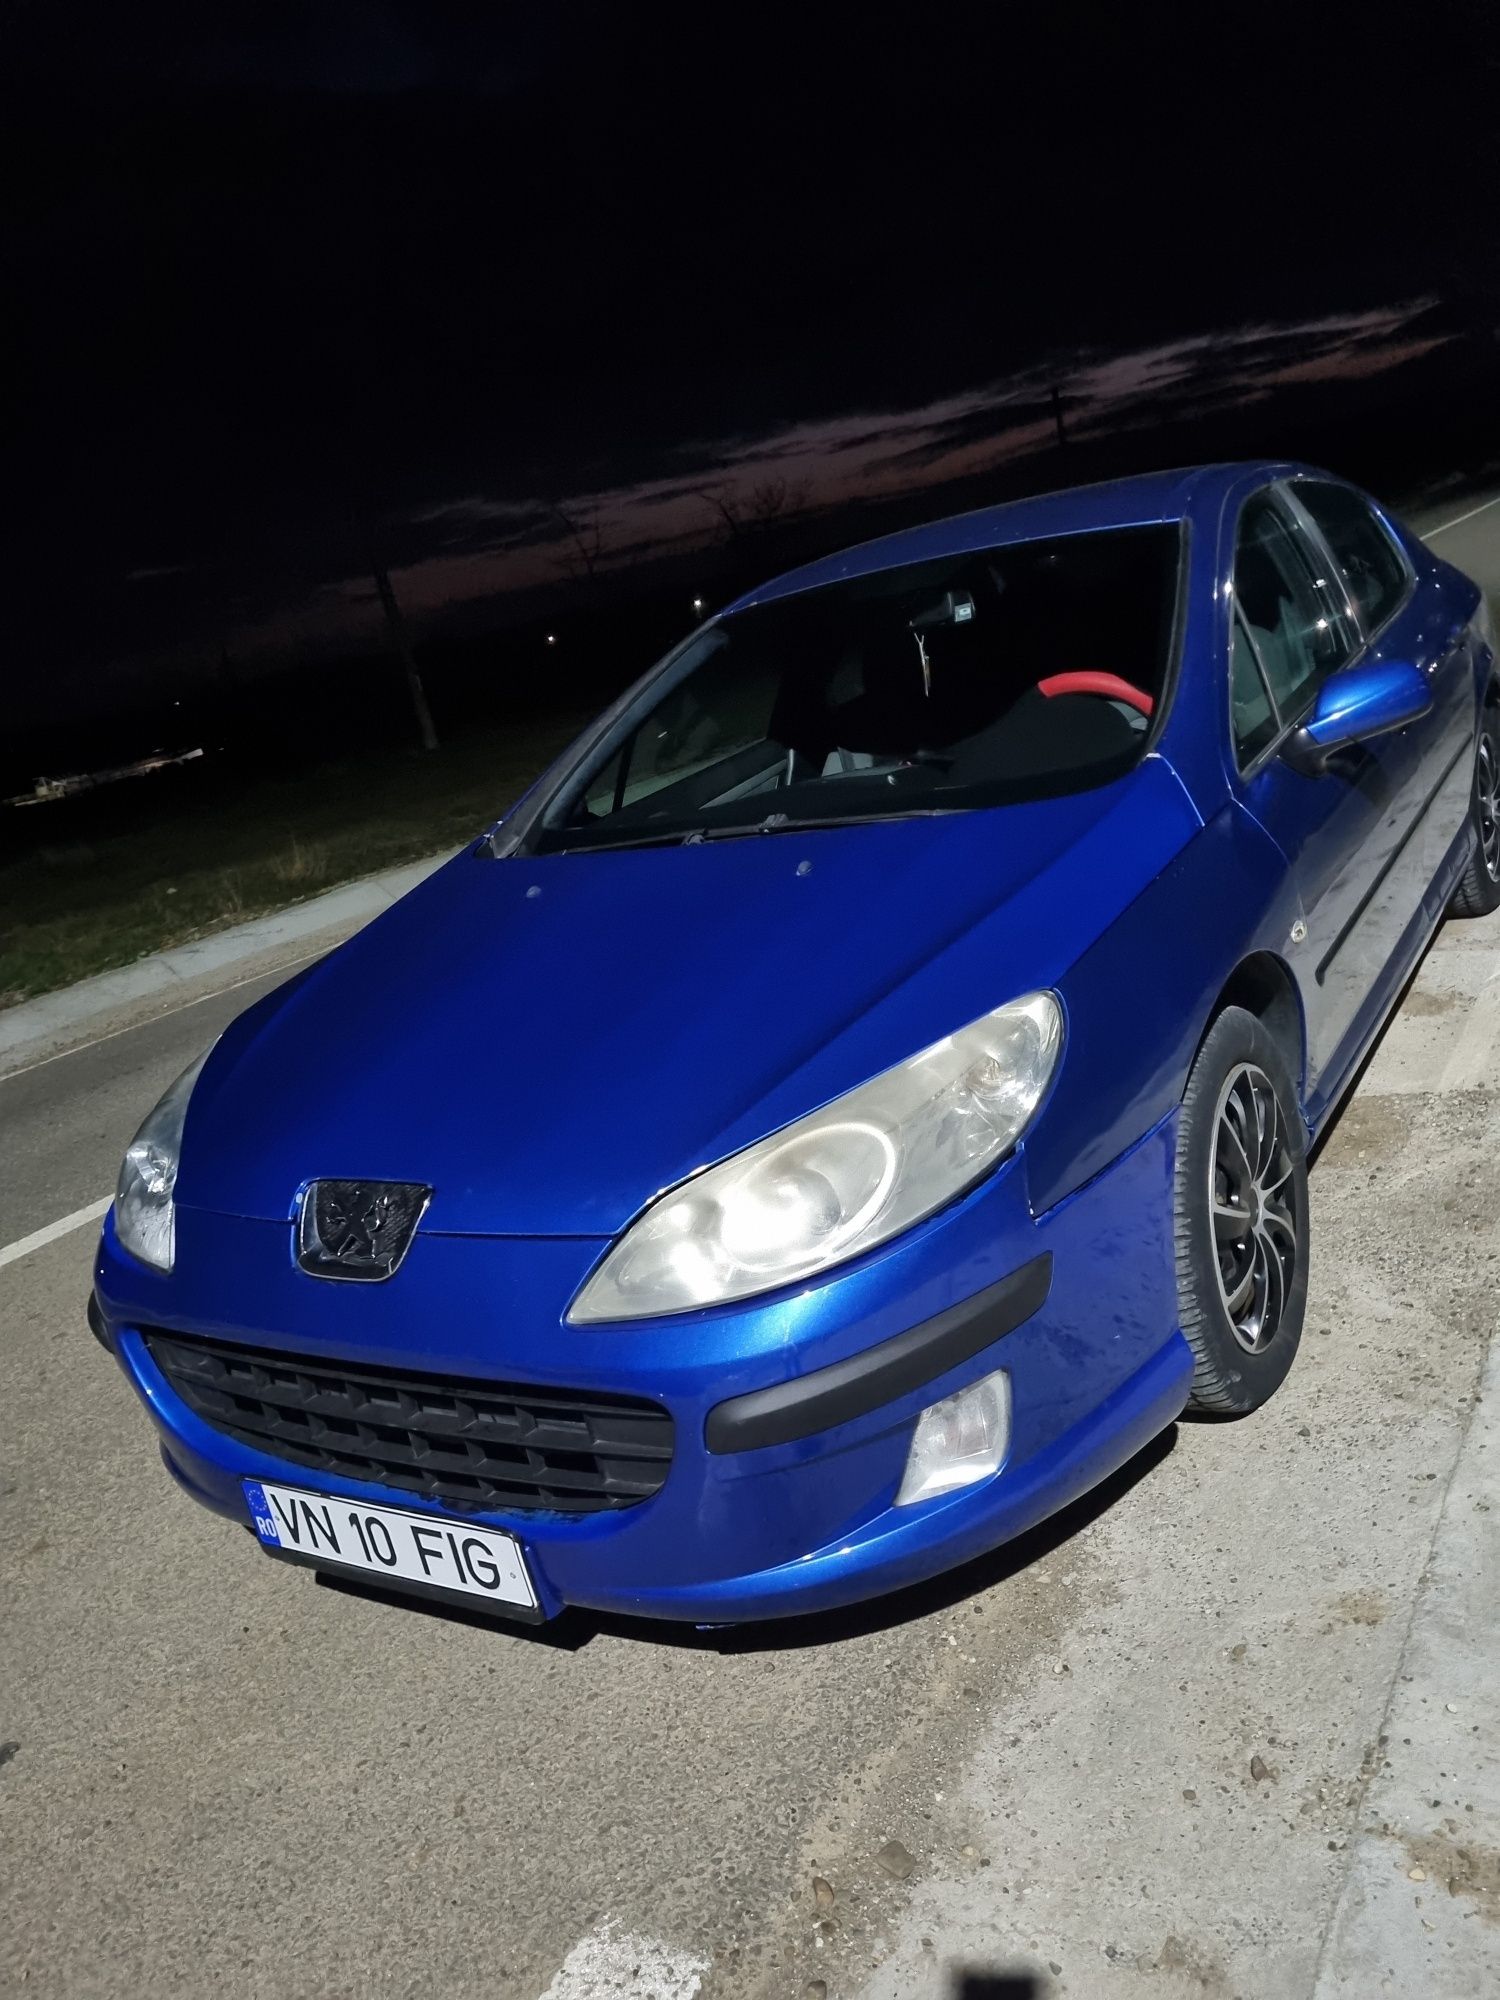 Vand  Peugeot 407 1.6 hdi An 2005